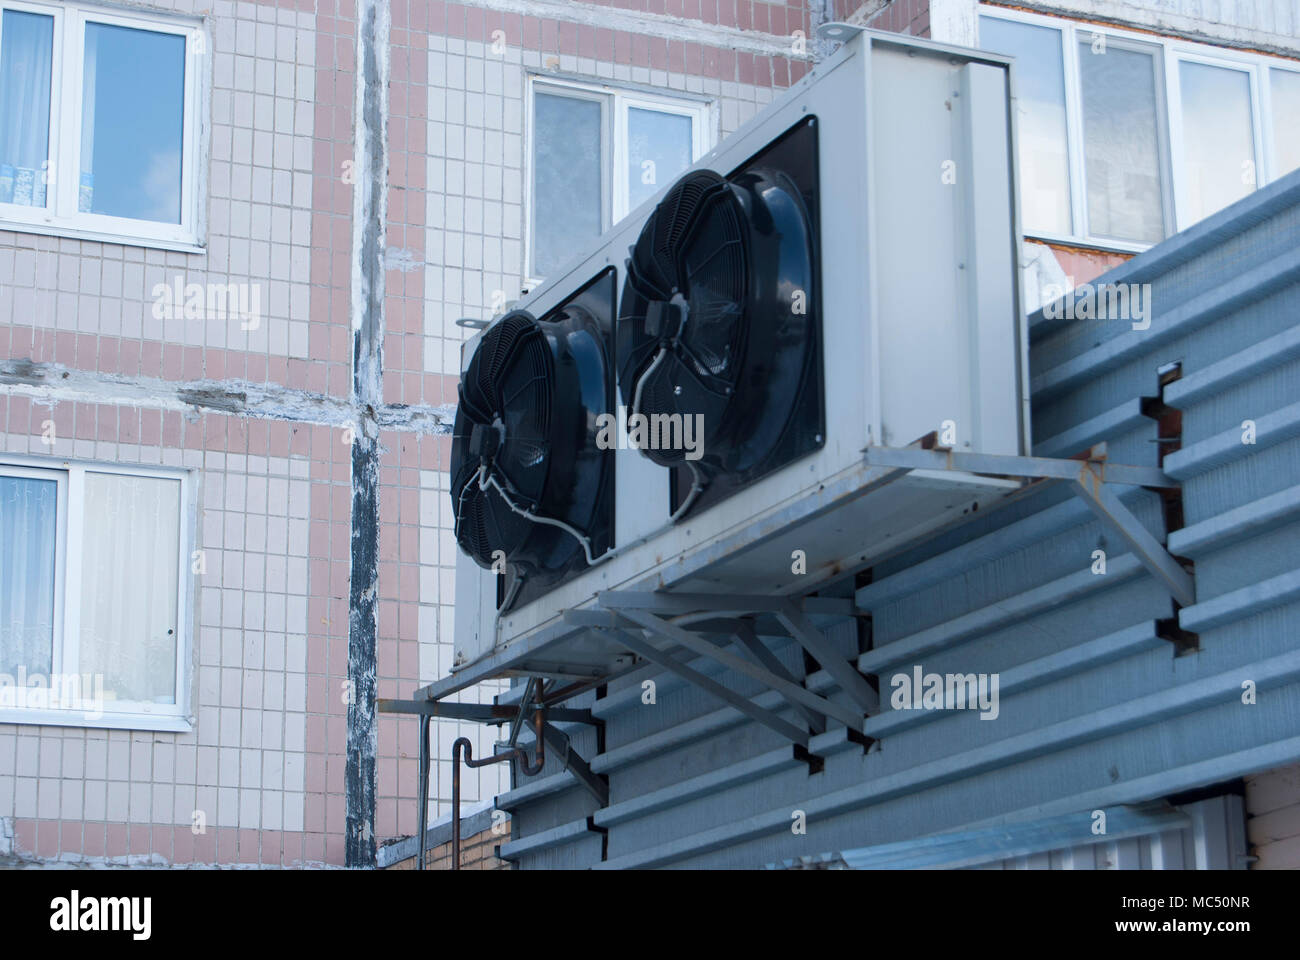 Two large black industrial fans from the air conditioner on the wall of the store Stock Photo